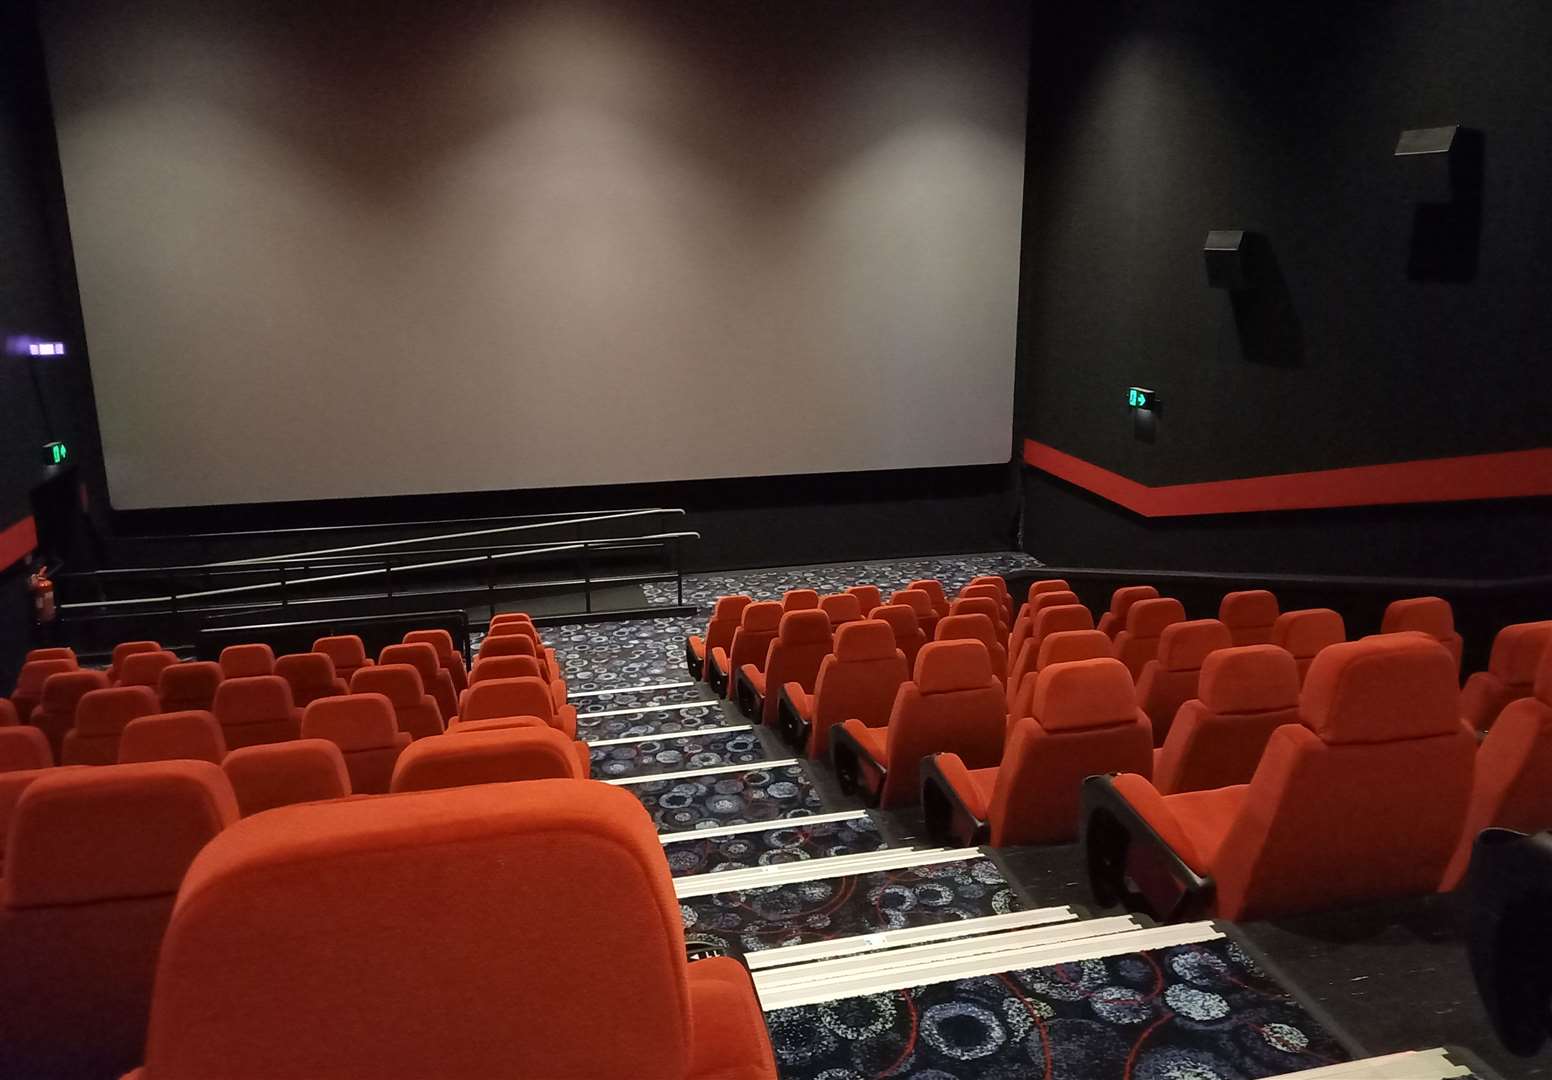 The 12 screens in the original part of the cinema have been refurbished